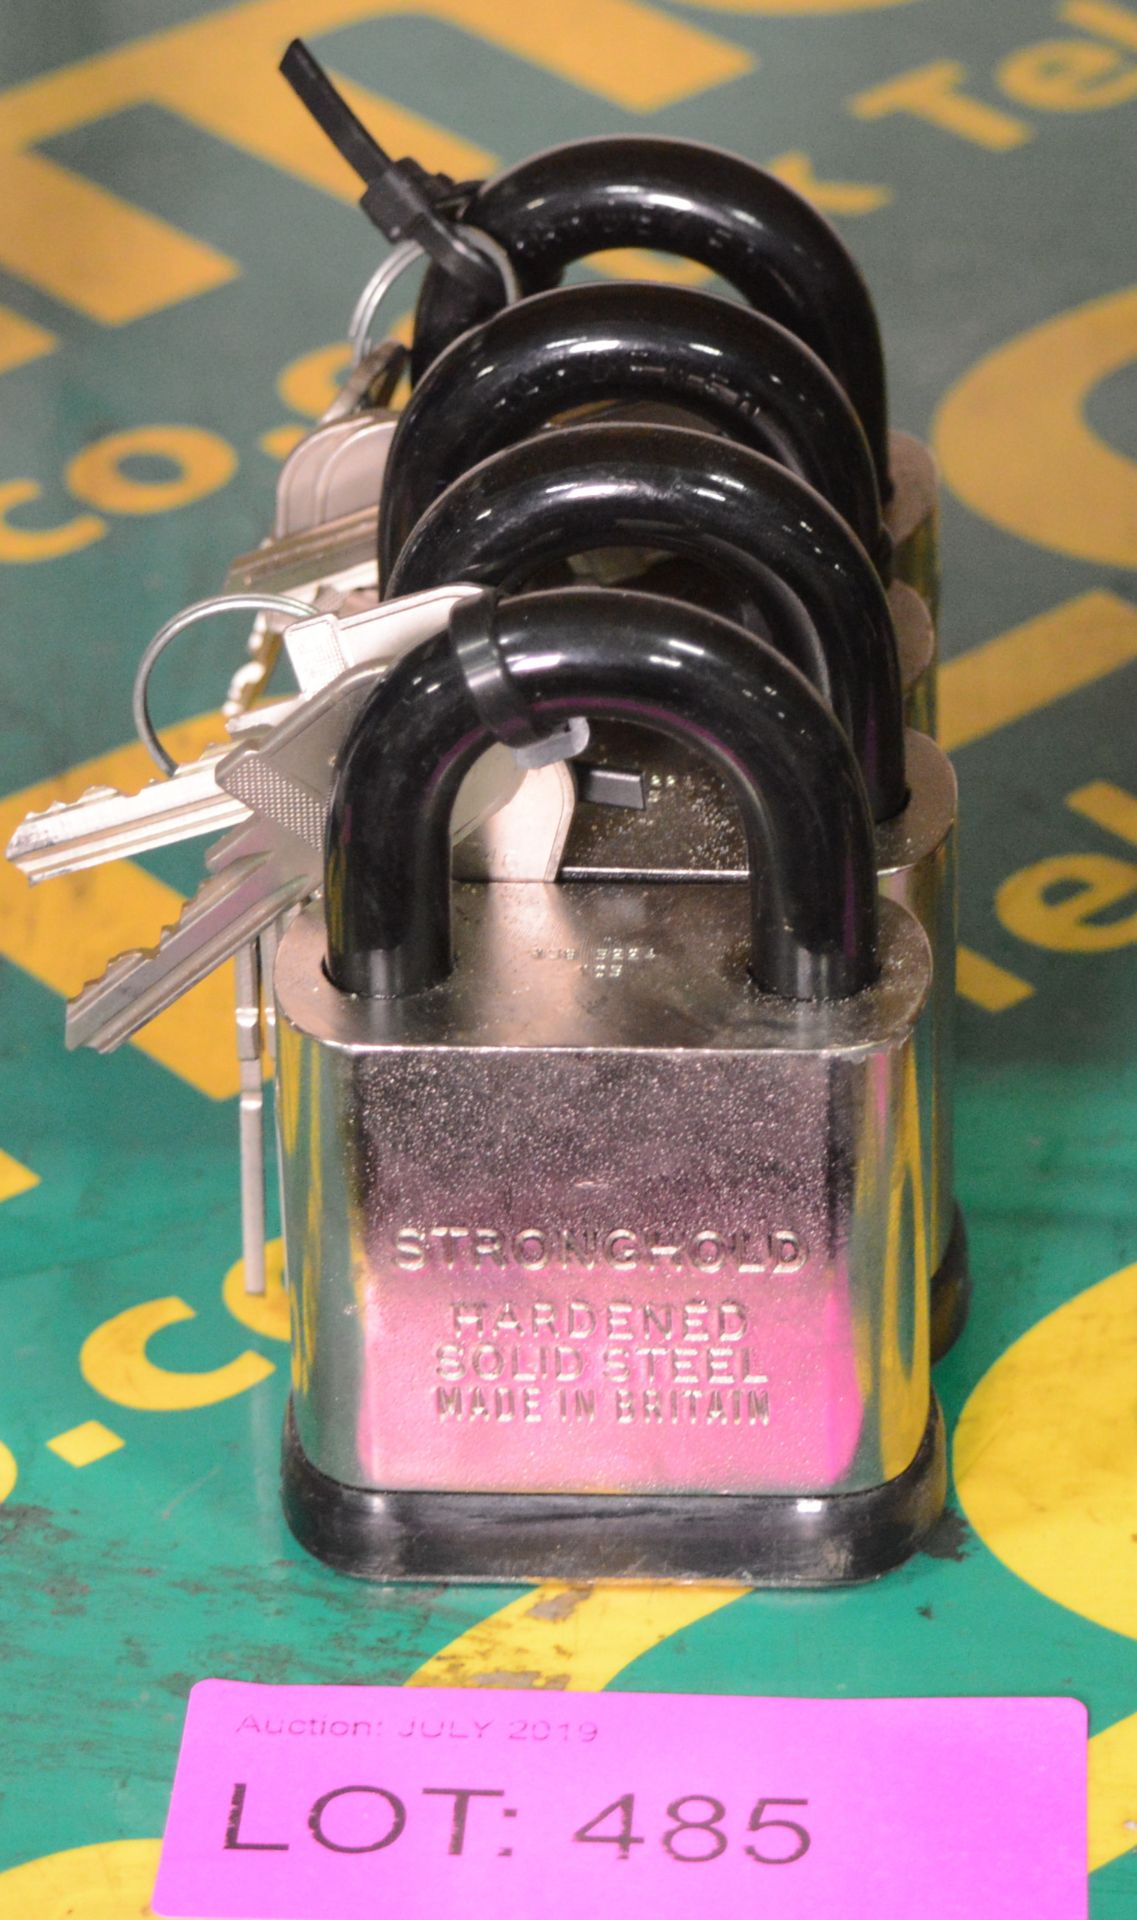 4x Squire Stronghold Padlocks with 3 keys each.